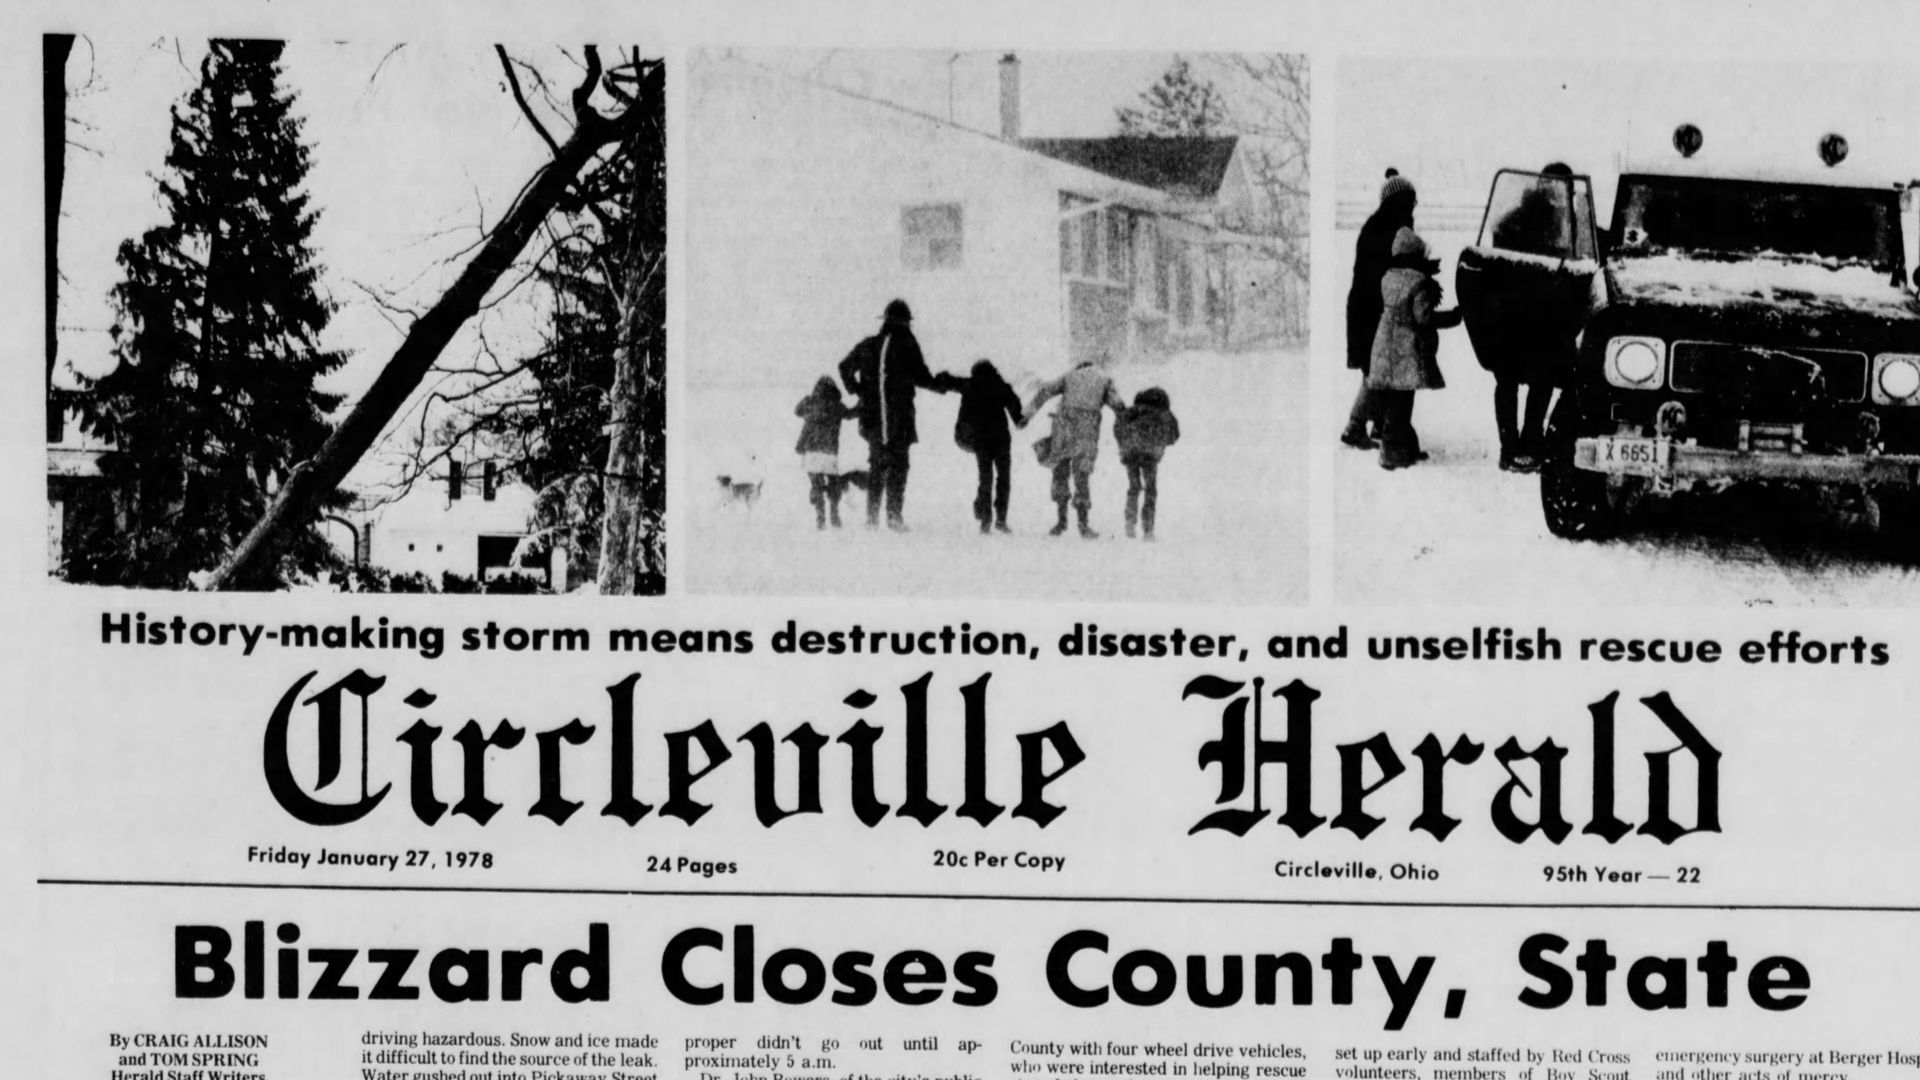 An Ohio newspaper clipping from 1978 reporting "Blizzard closes county, state"